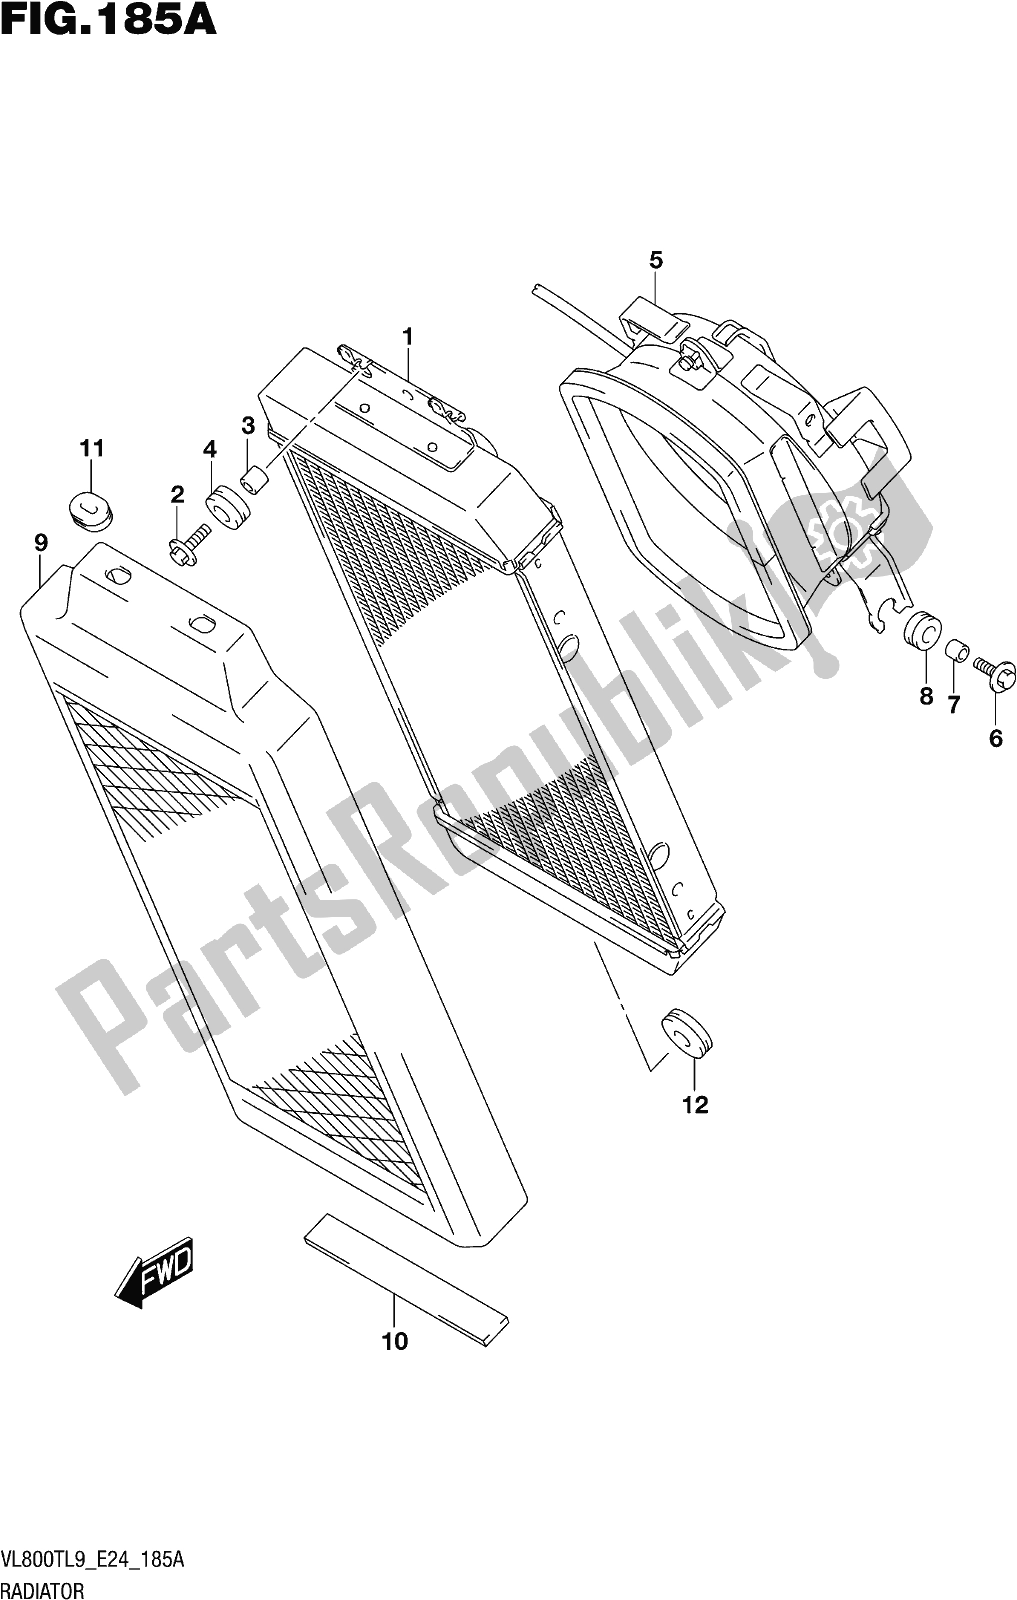 All parts for the Fig. 185a Radiator of the Suzuki VL 800T 2019